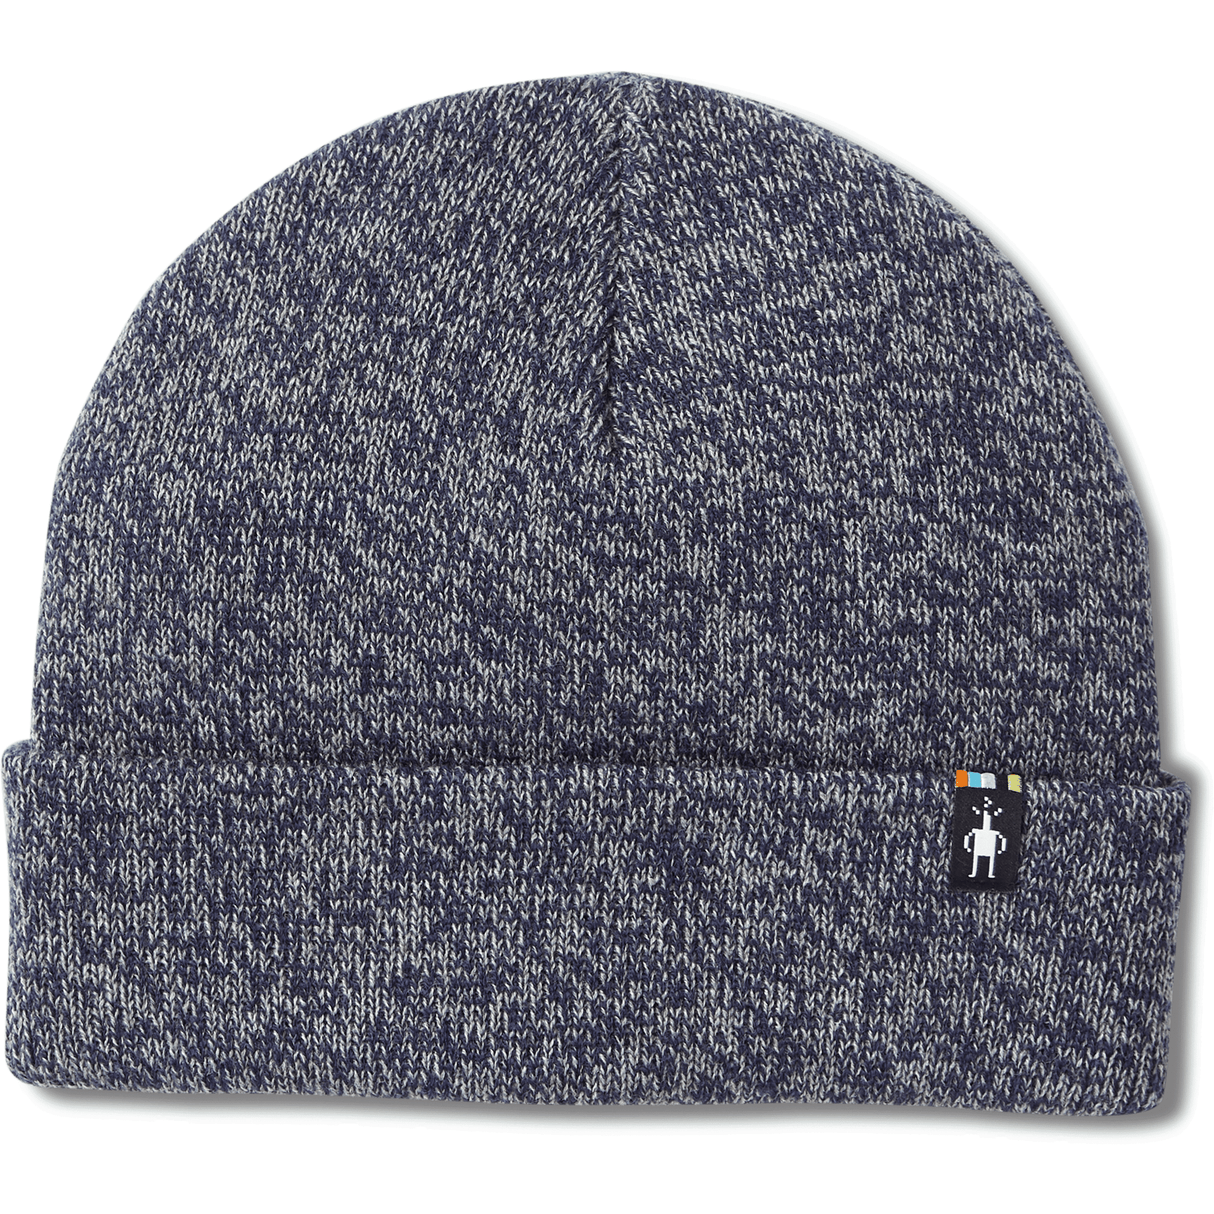 Smartwool Cozy Cabin Hat  -  One Size Fits Most / Deep Navy